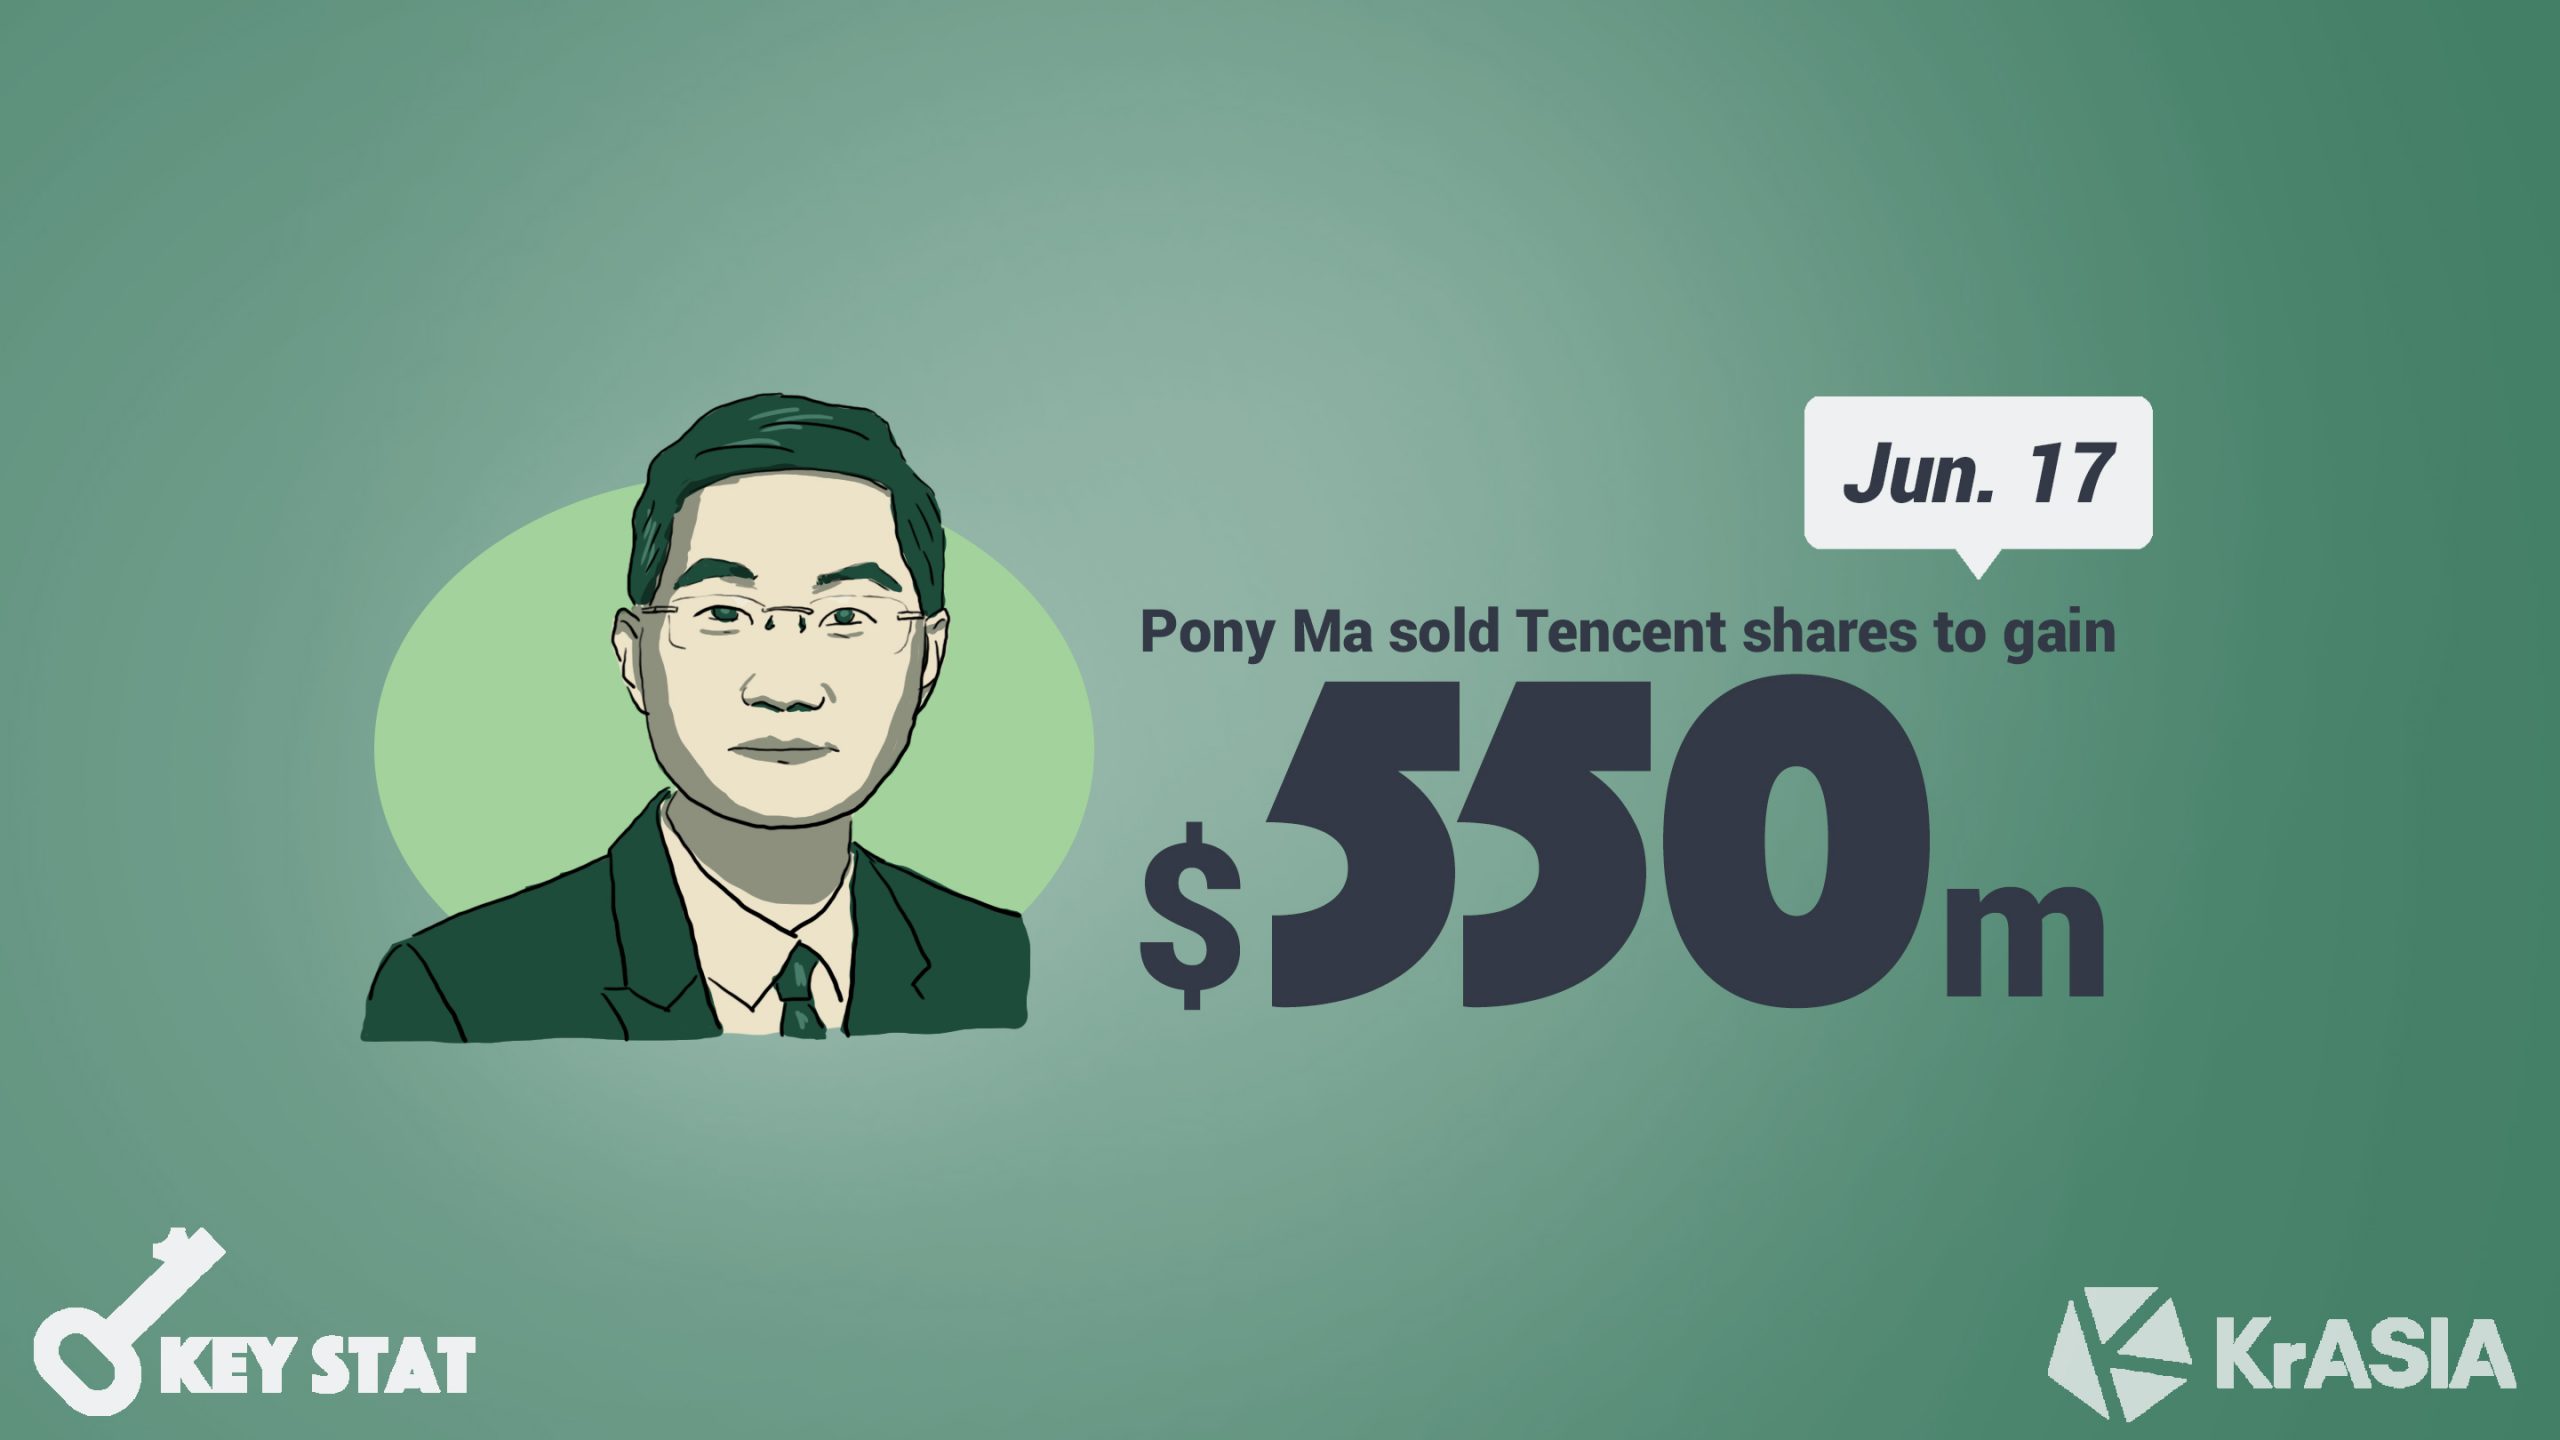 KEY STAT | Pony Ma sold USD 550 million worth of Tencent shares in four days